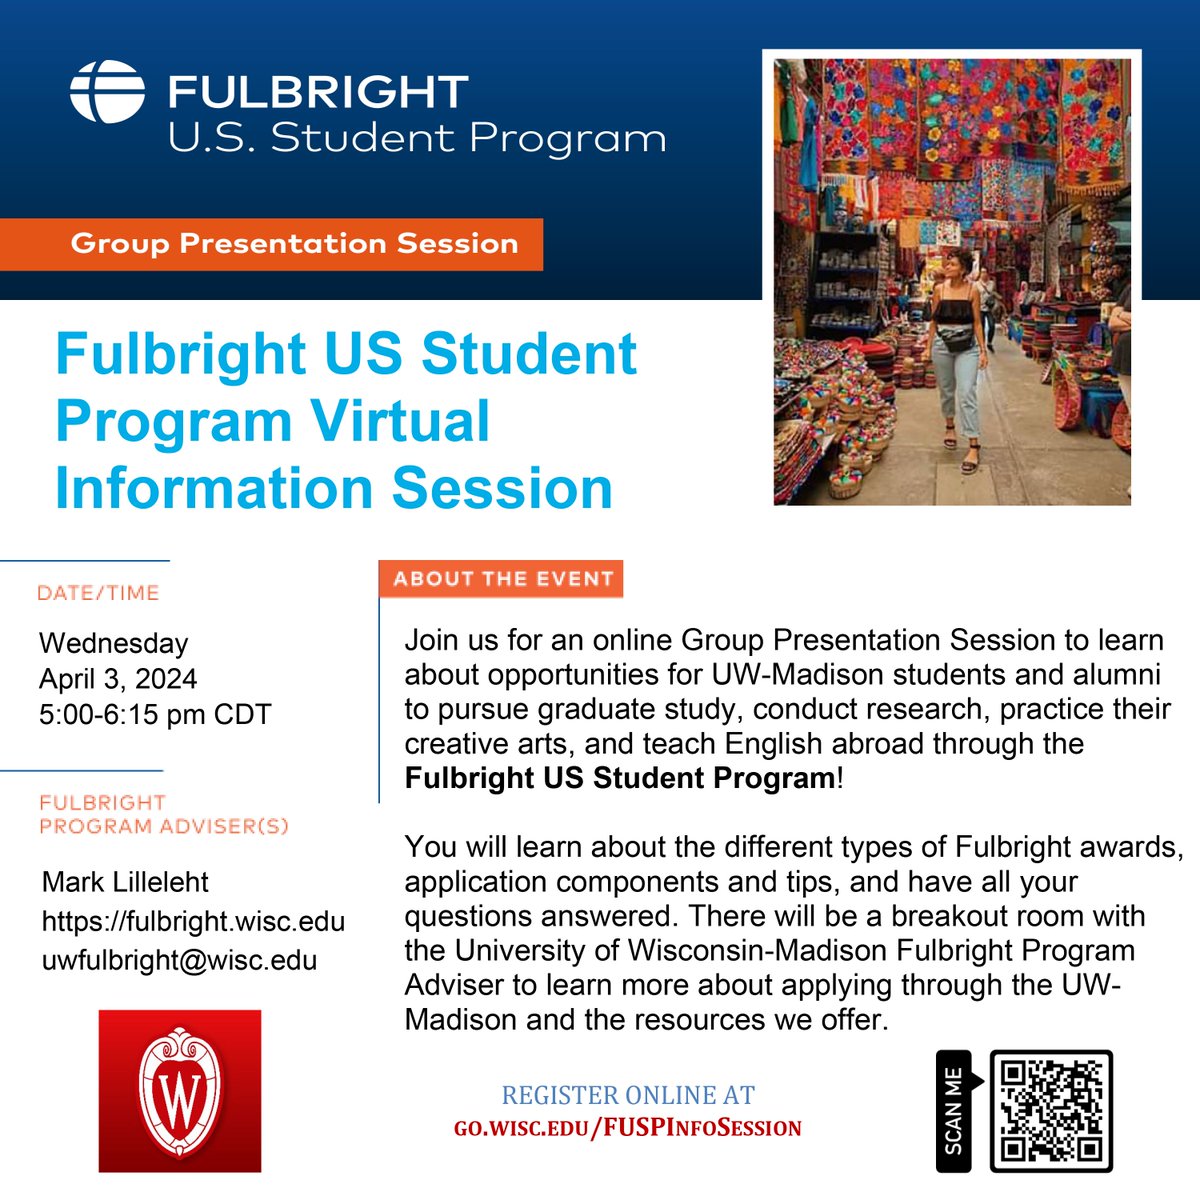 You are invited to this Fullbright information session! #fullbright